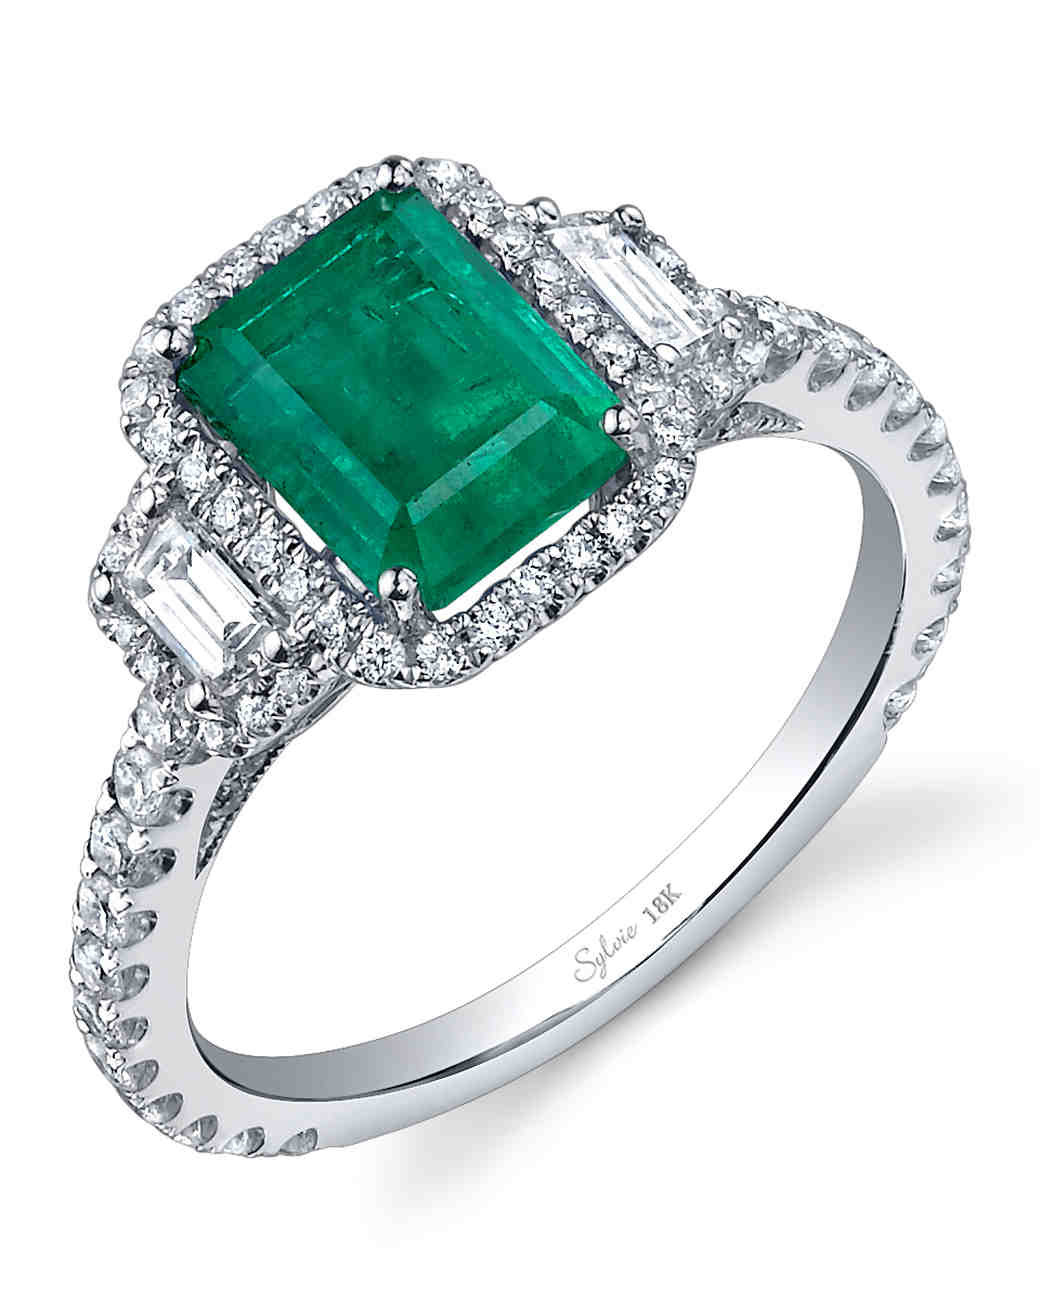 Diamond And Emerald Engagement Ring
 Emerald Engagement Rings for a e of a Kind Bride